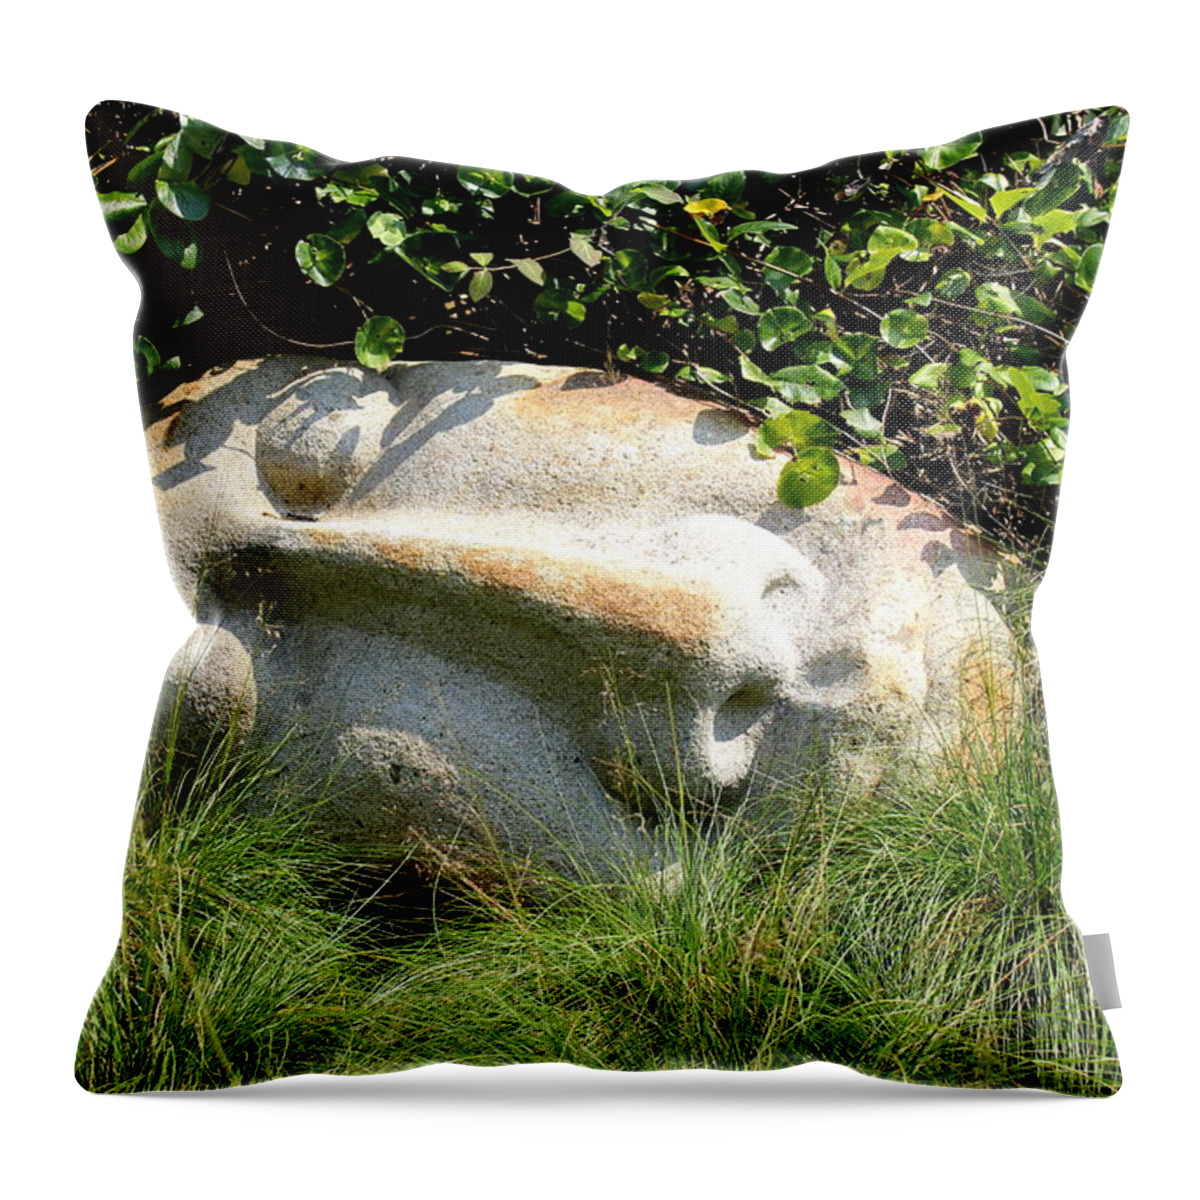 Statuary Throw Pillow featuring the photograph Stone-faced by Deborah Crew-Johnson